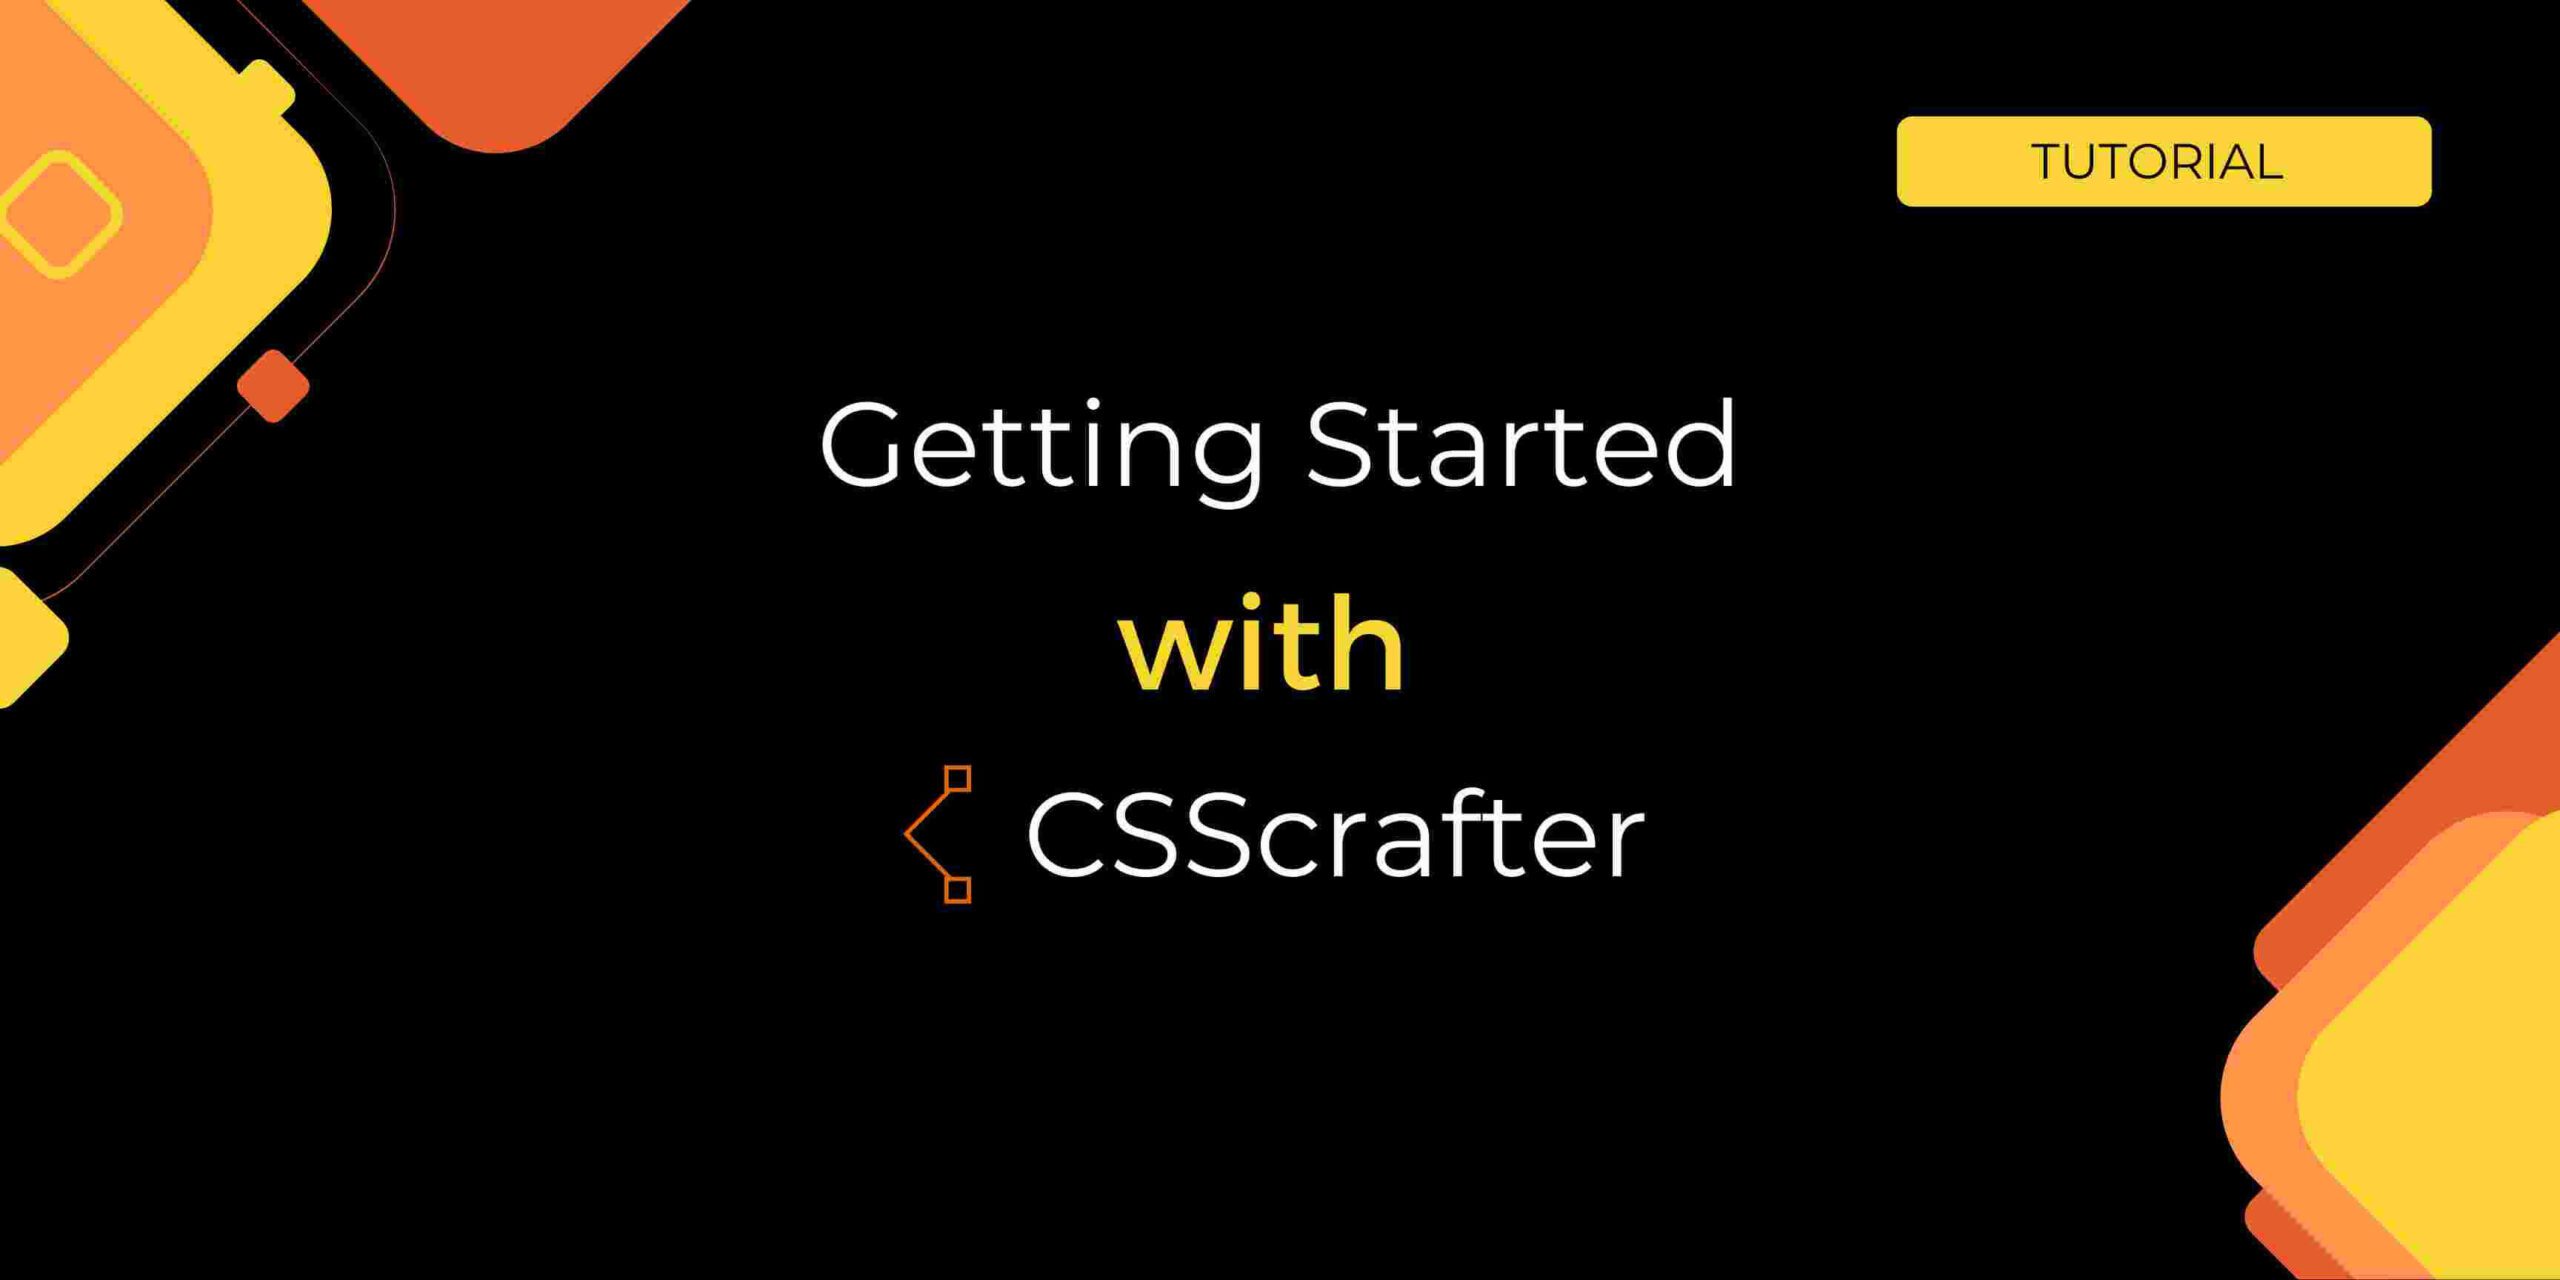 Getting Started with CSScrafter